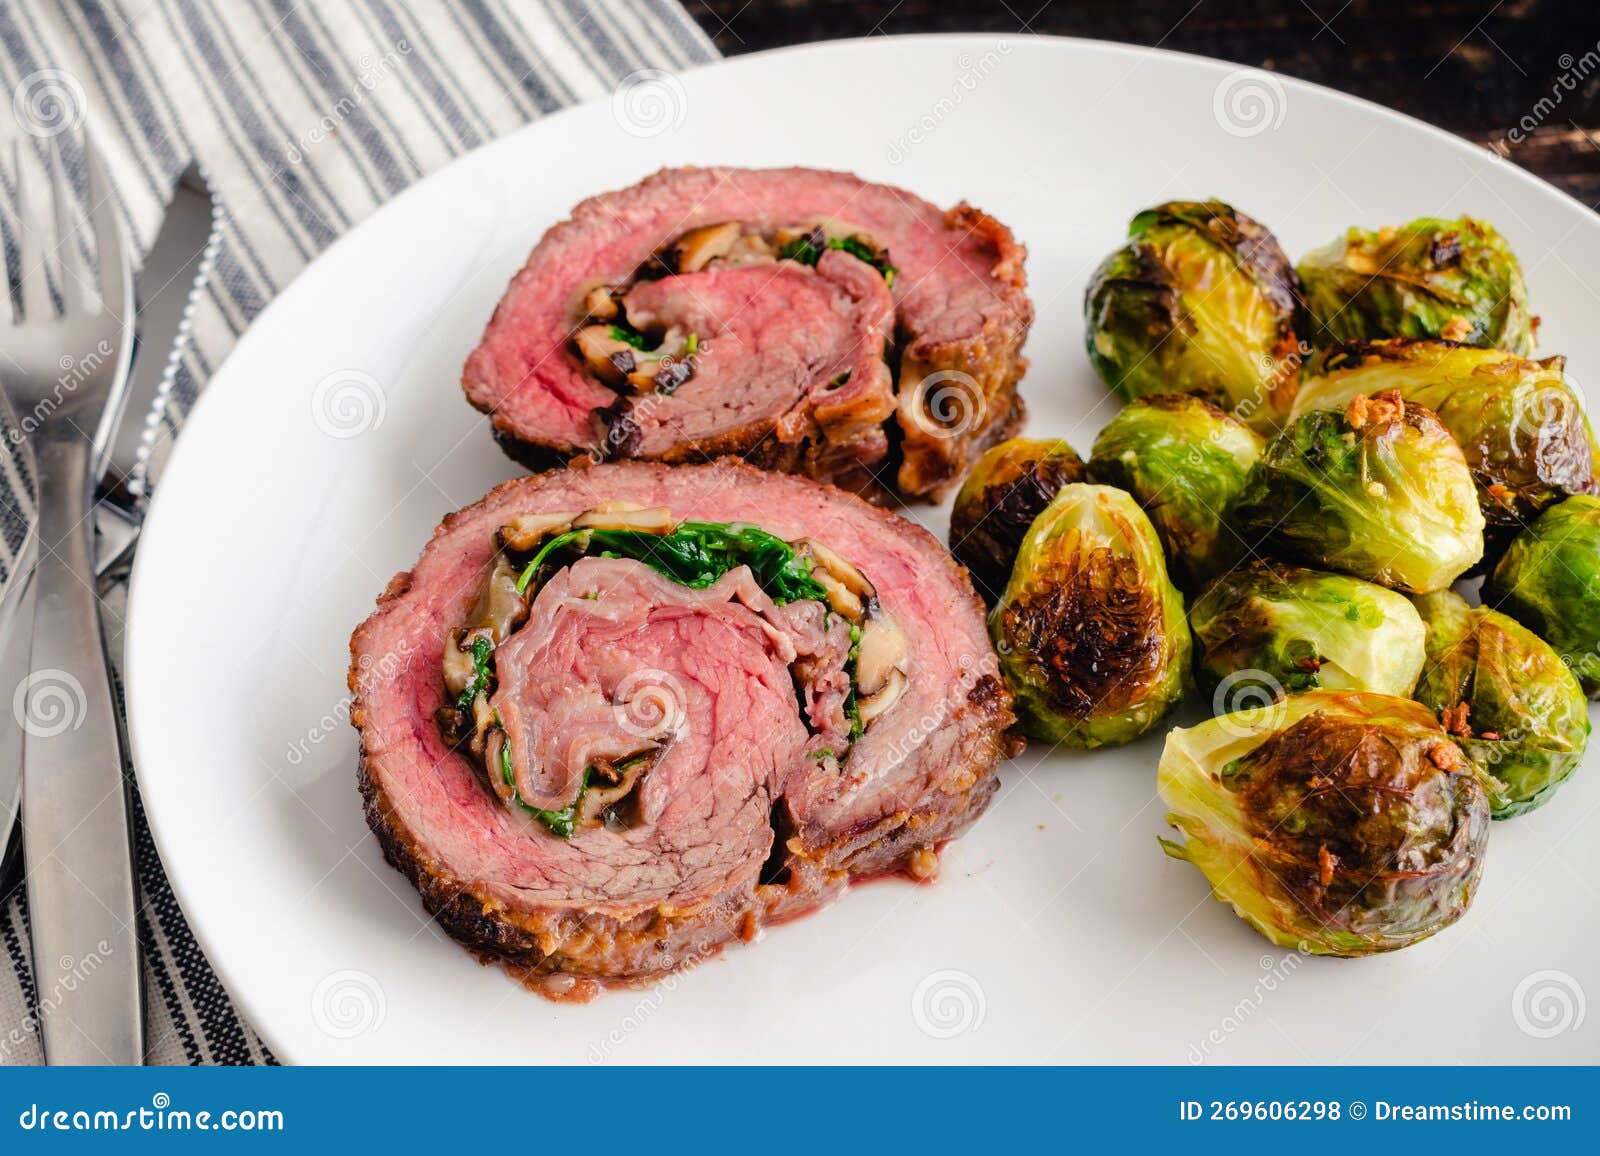 stuffed flank steak with prosciutto and mushrooms dinner